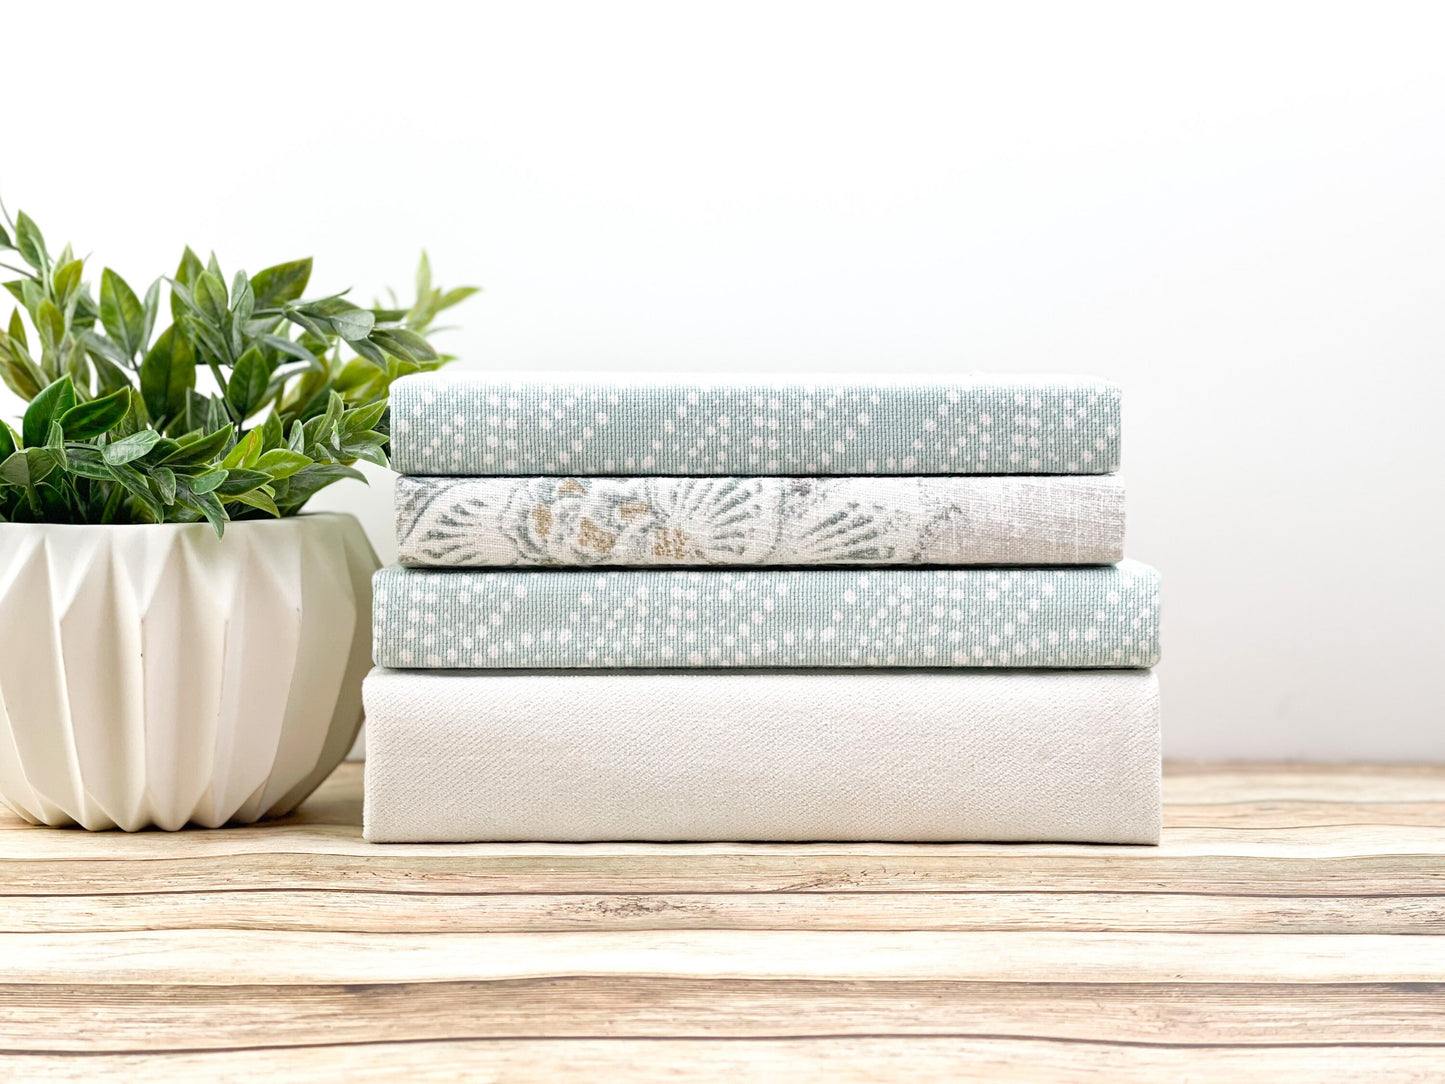 Linen Covered Books for Home Decorative